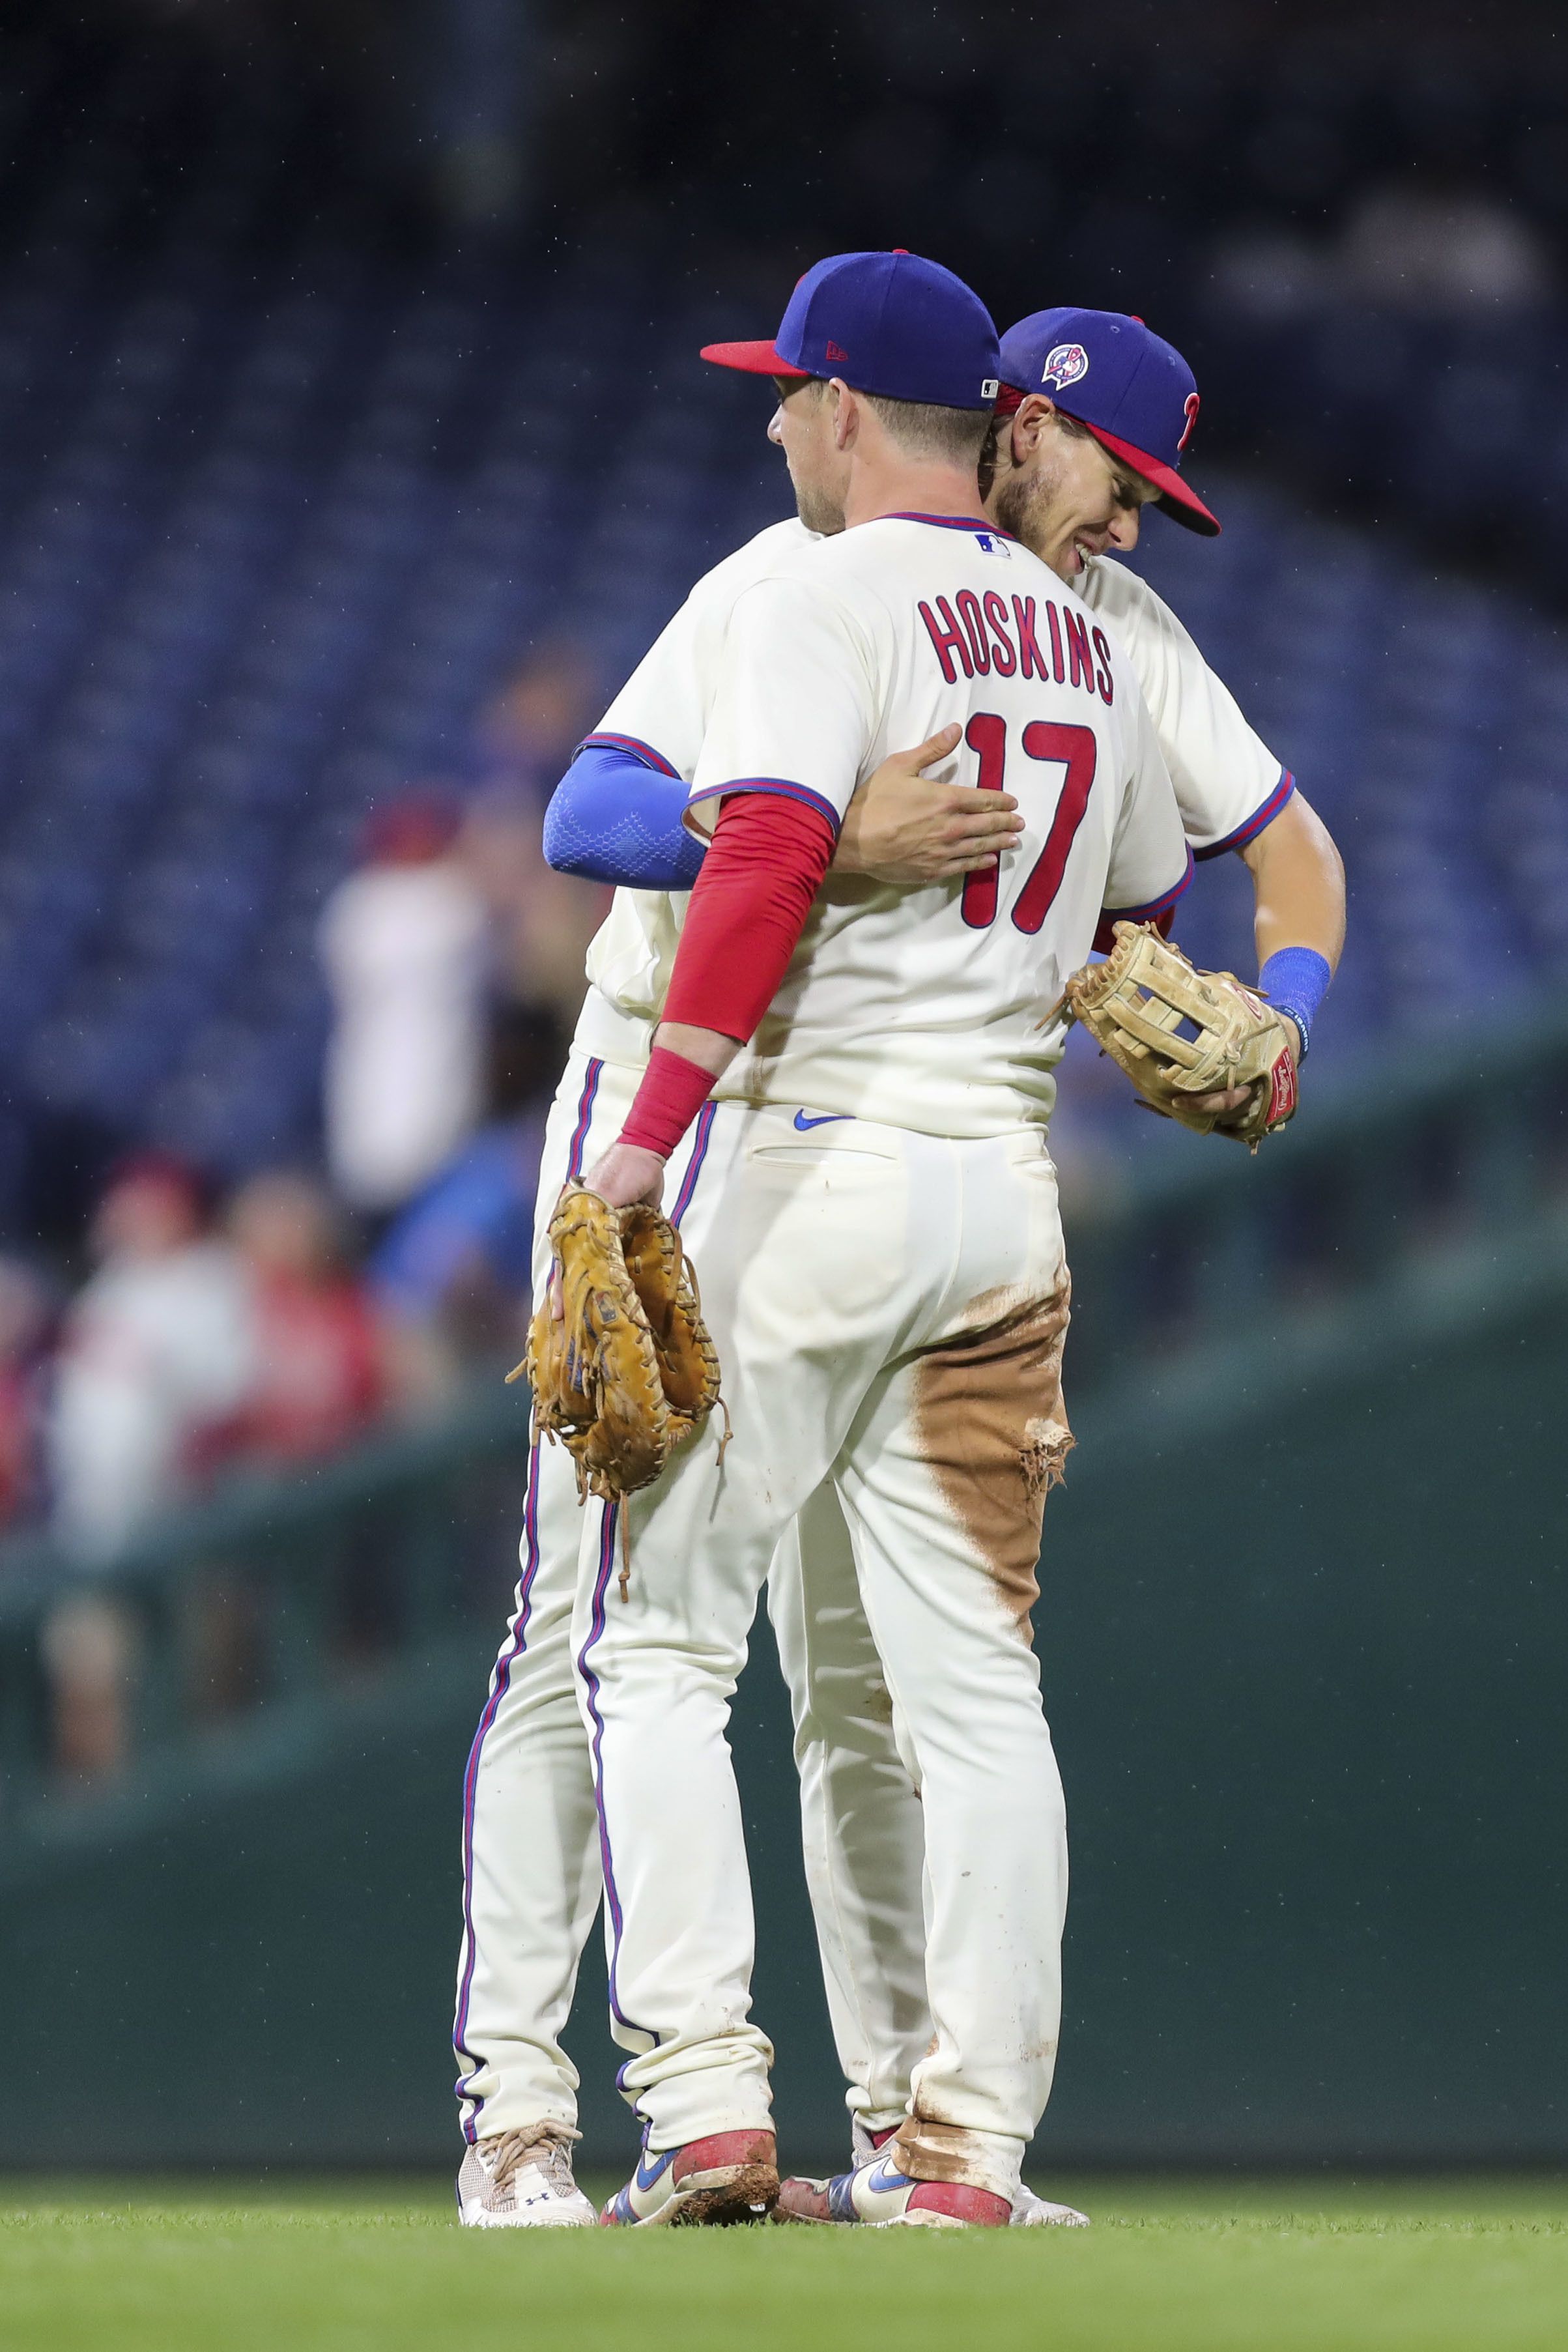 1992 Week: The Phillies' very decent uniforms and logo  Phillies Nation -  Your source for Philadelphia Phillies news, opinion, history, rumors,  events, and other fun stuff.